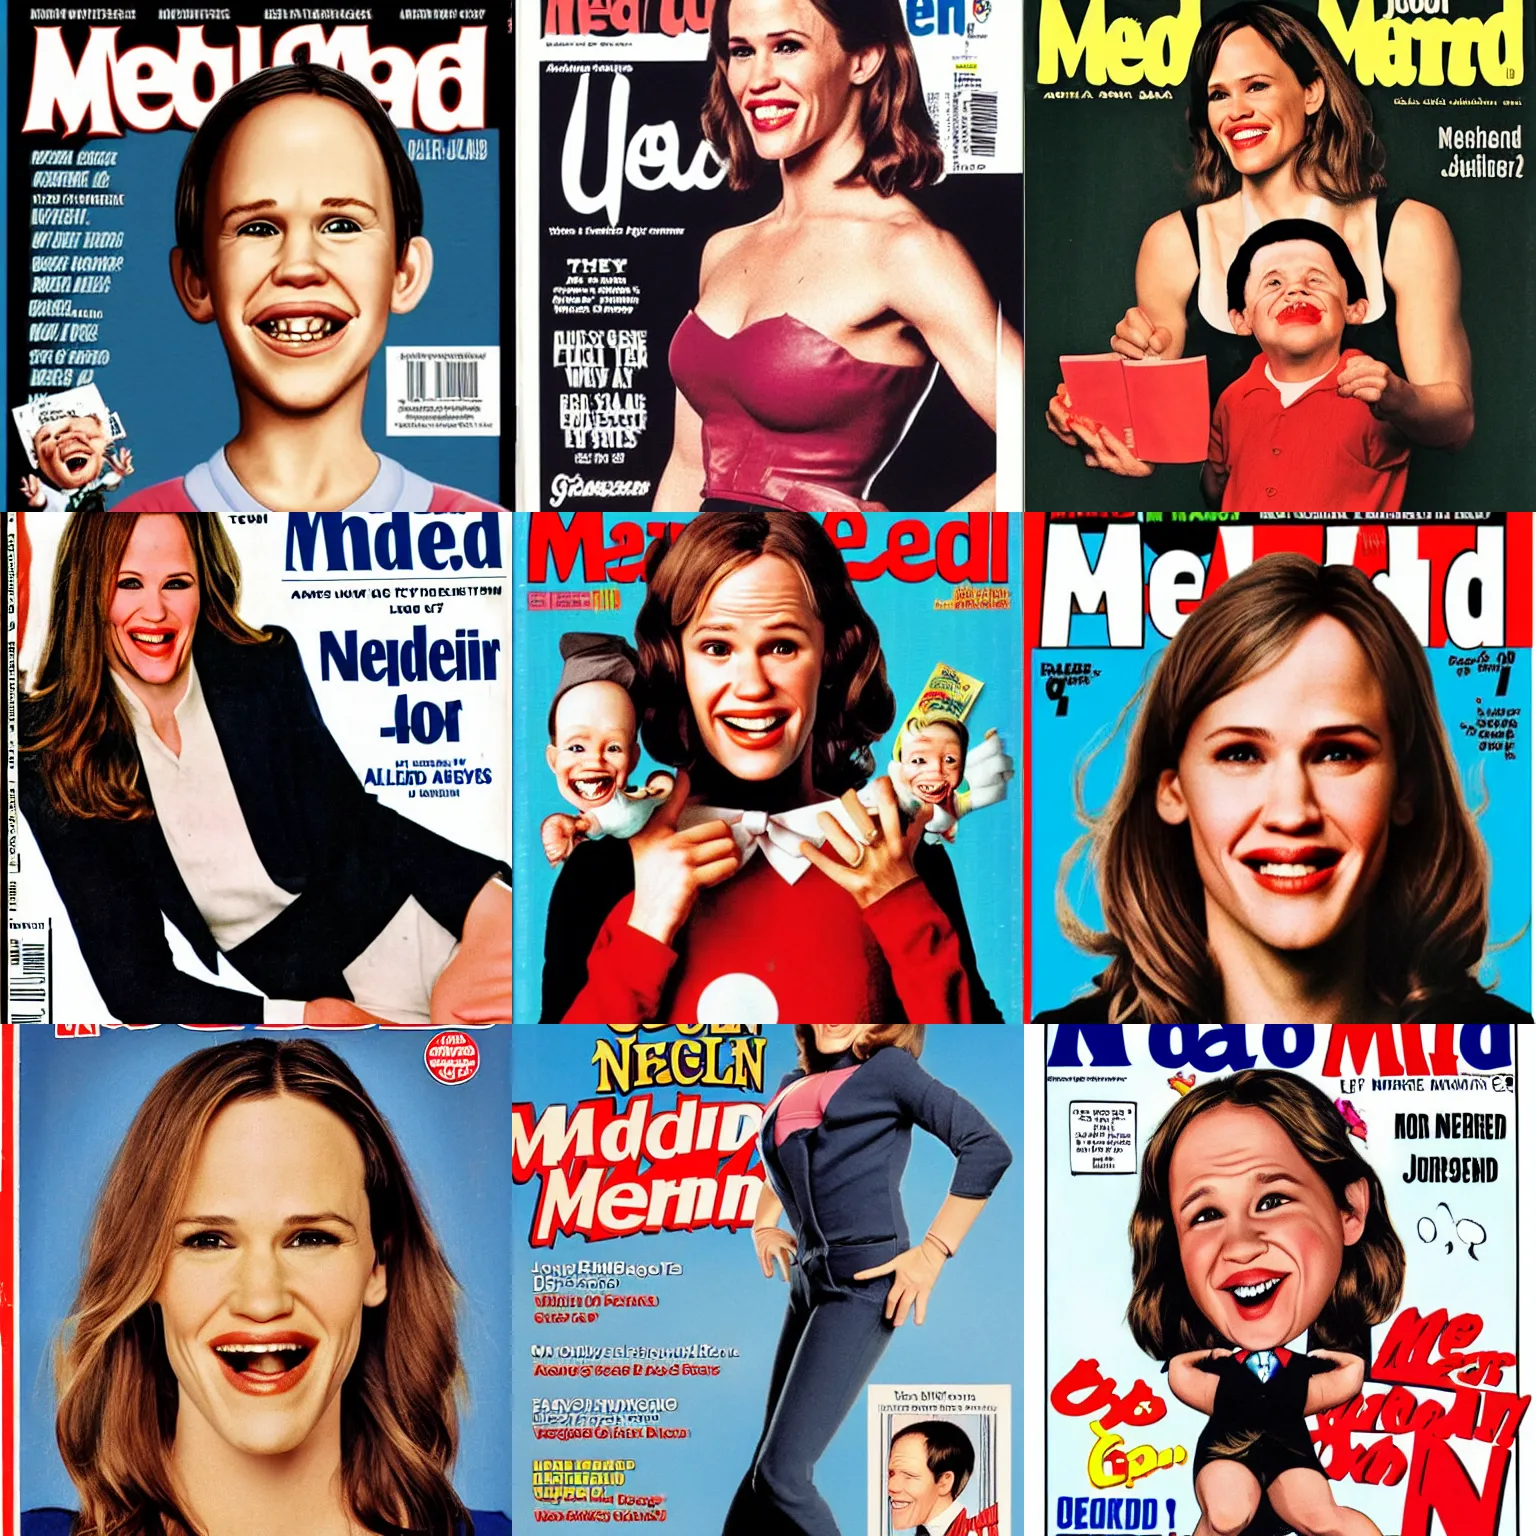 Prompt: Jennifer Garner as Alfred E Neuman on the cover of the MAD magazine